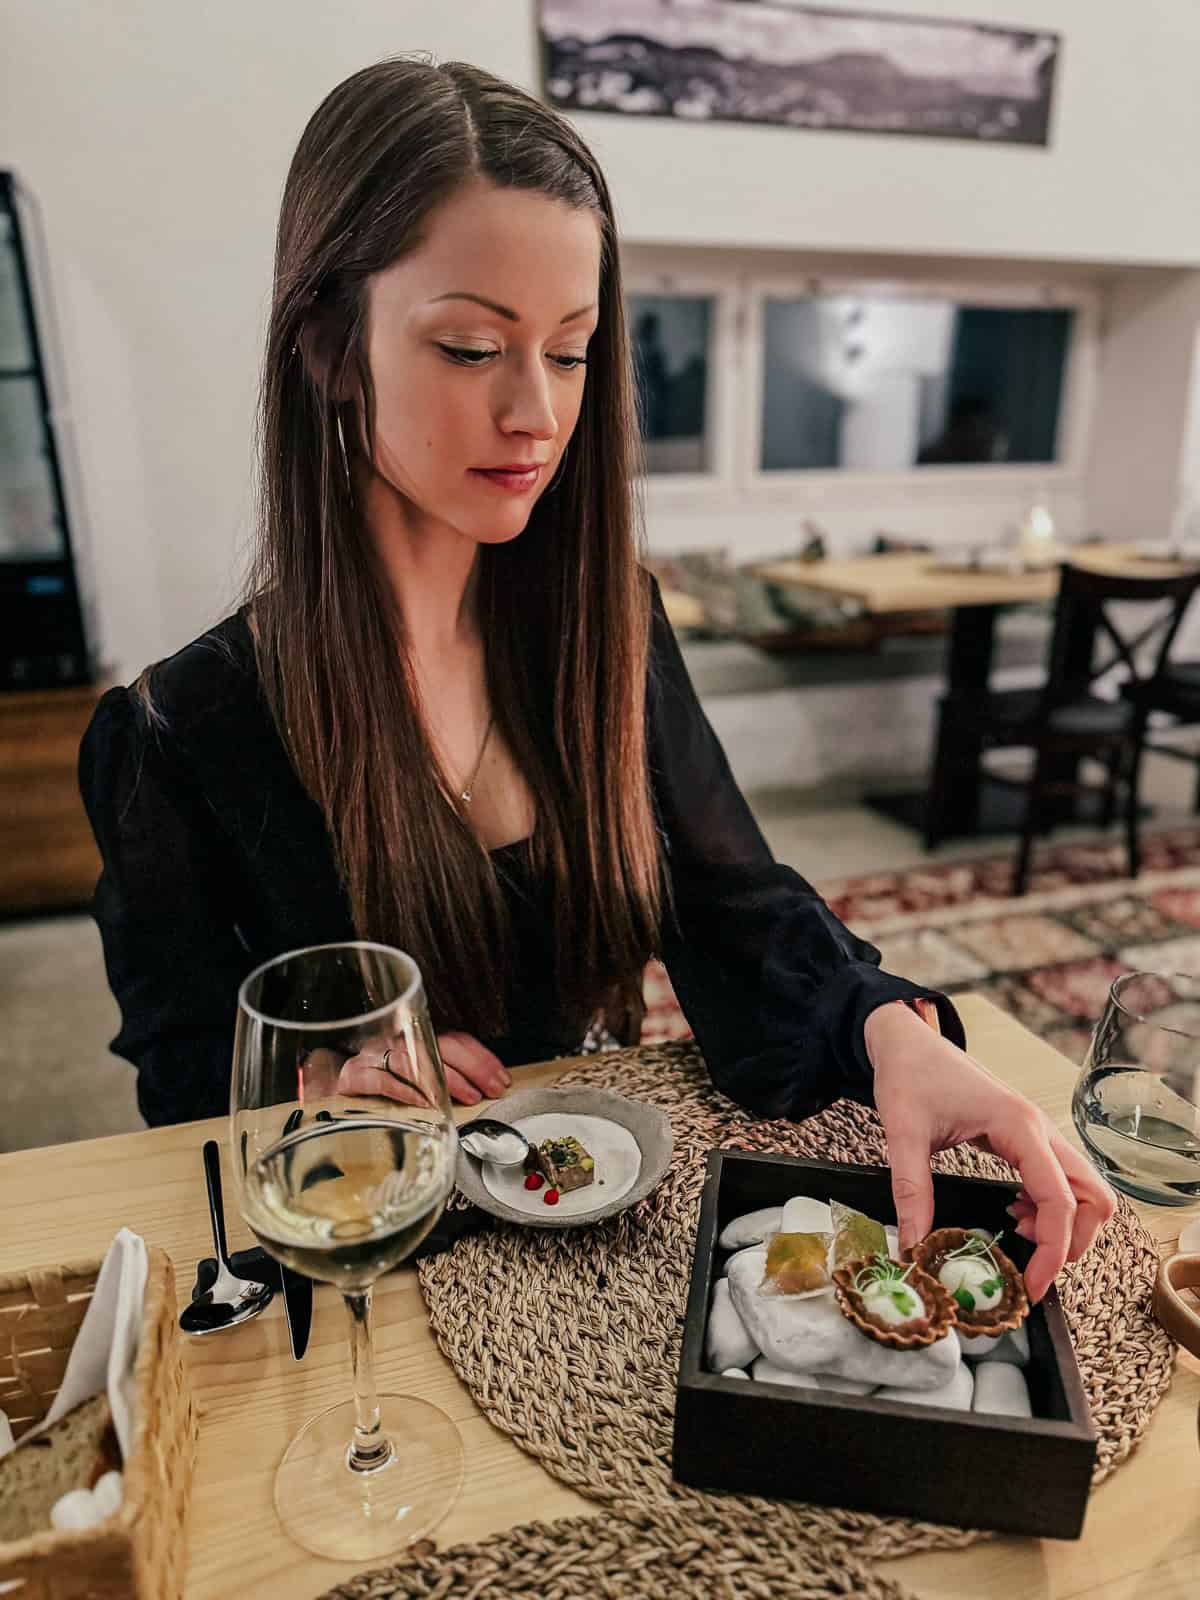 A woman with long brown hair is reaching into a black box of appetizers while a glass of white wine and a small dish with food are in front of her.